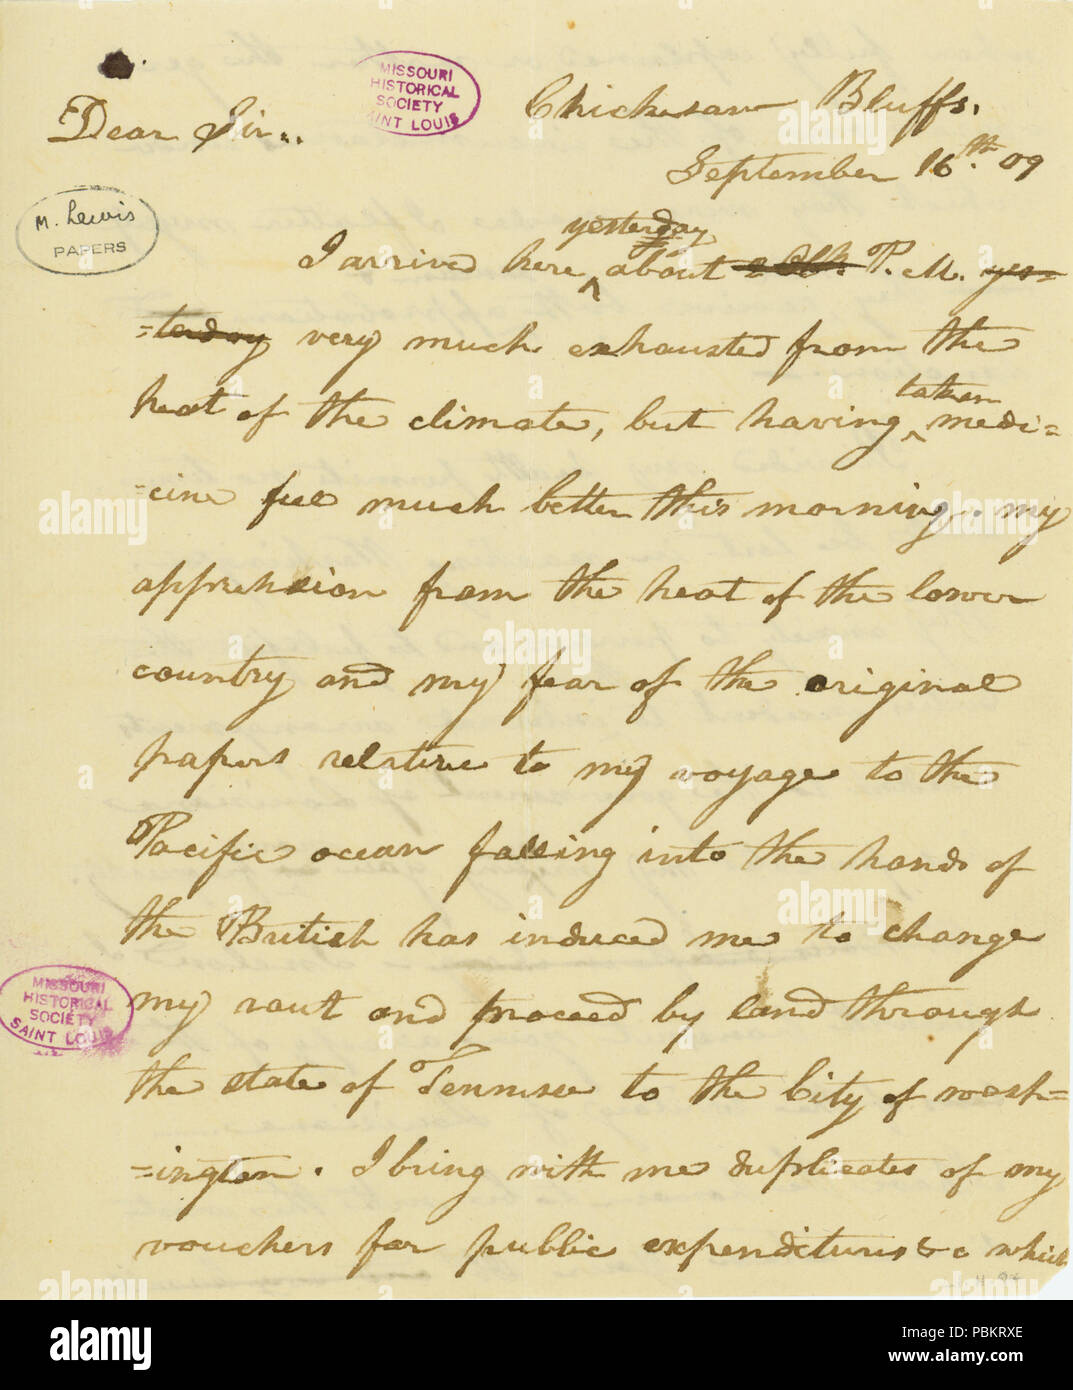 903 Lettera di Meriwether Lewis, Chickasaw Bluffs, a James Madison Esqr, 16 Settembre 1809 Foto Stock